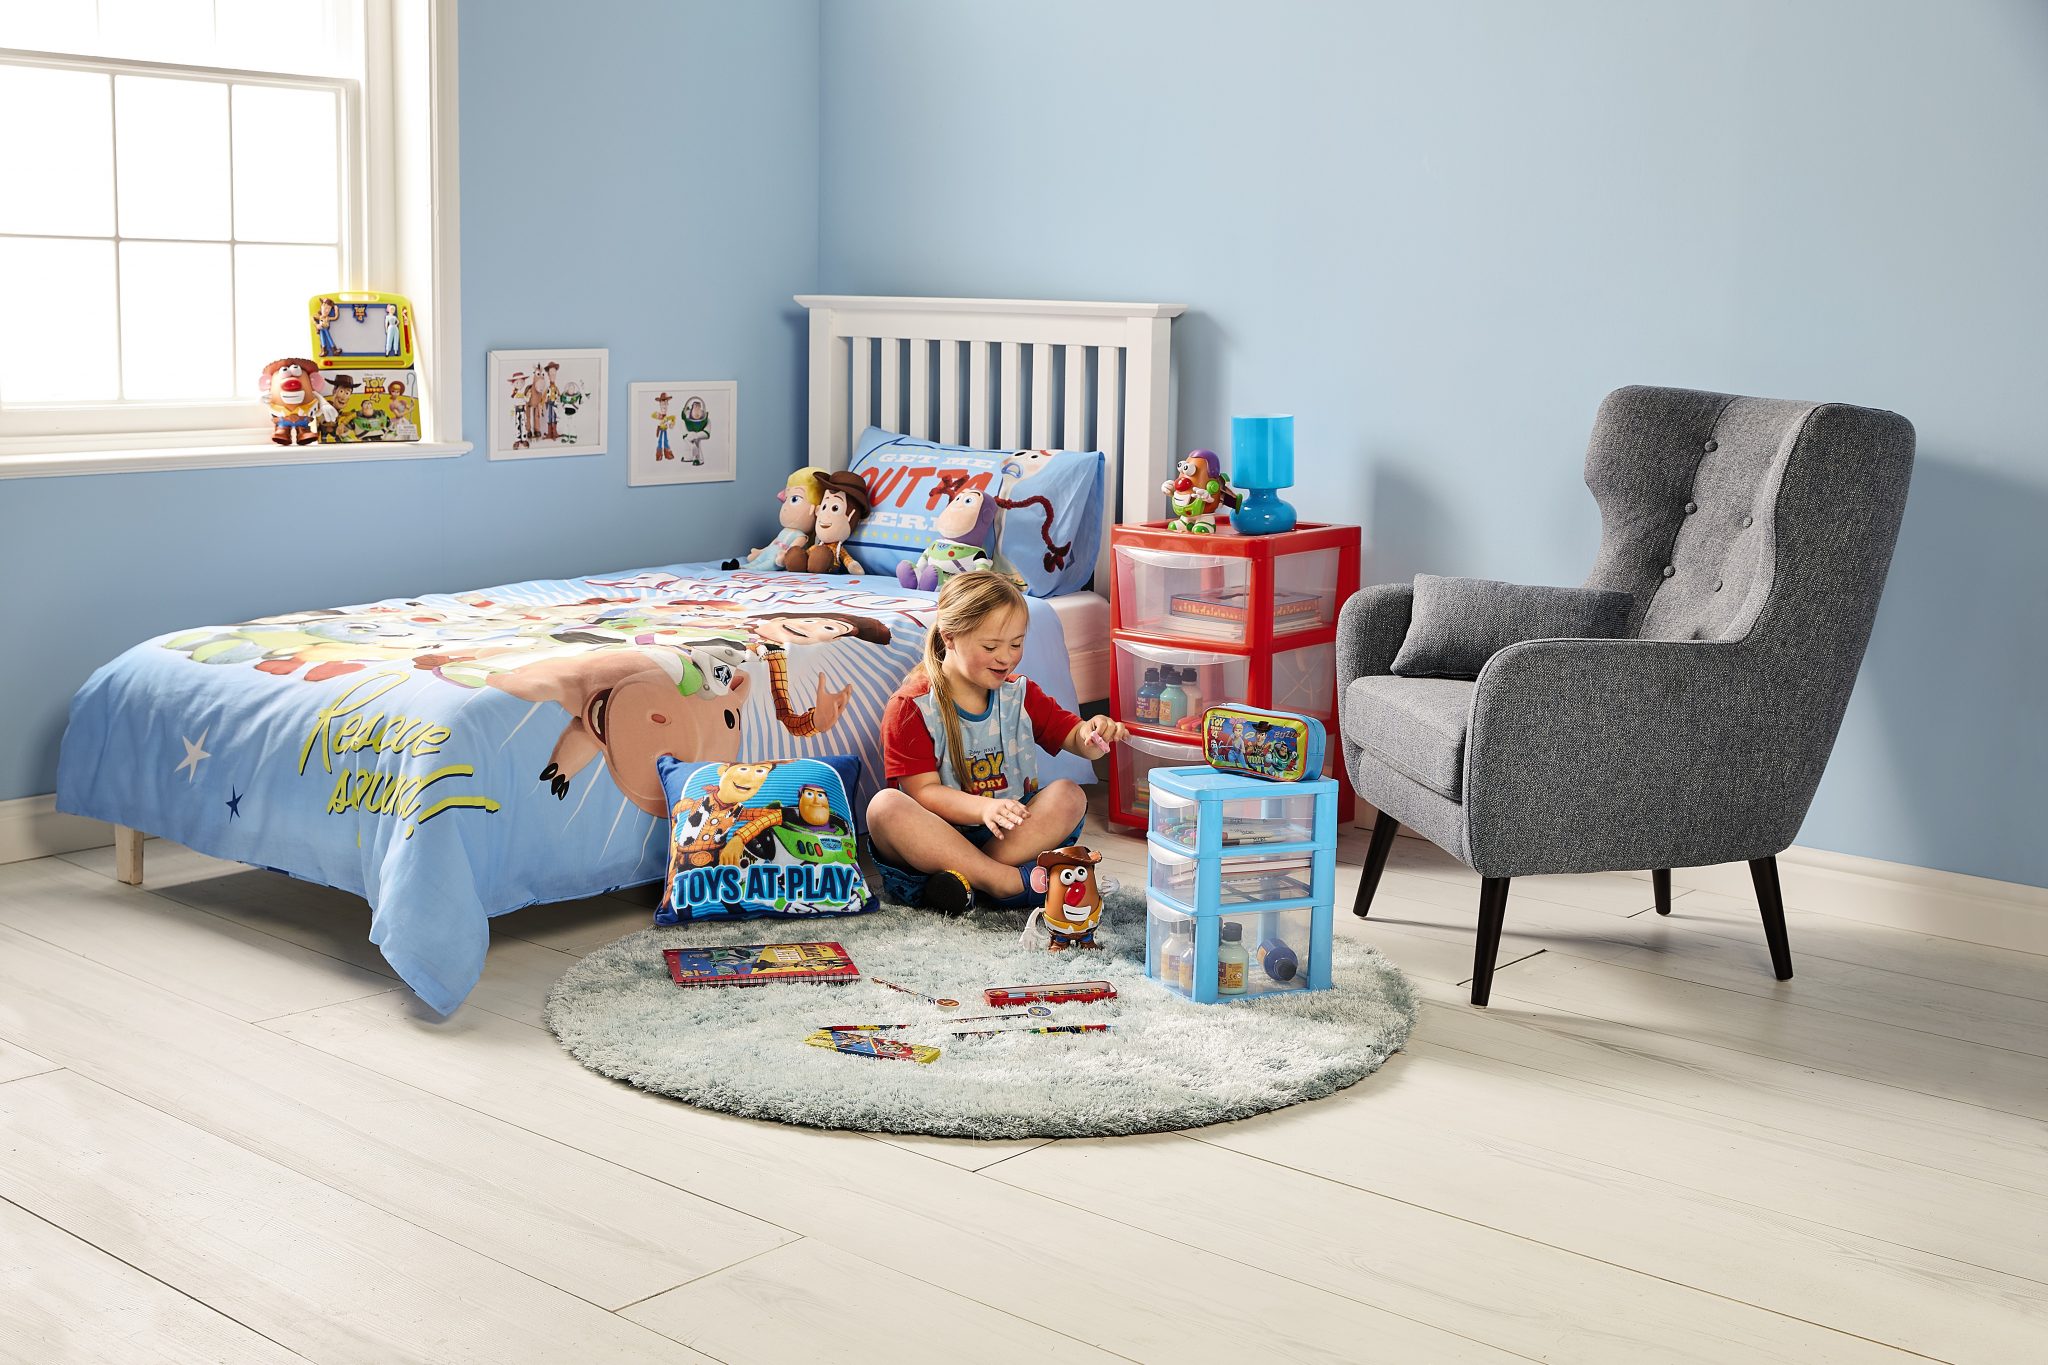 Kids will go crazy for the brand new Toy Story 4 range from Aldi